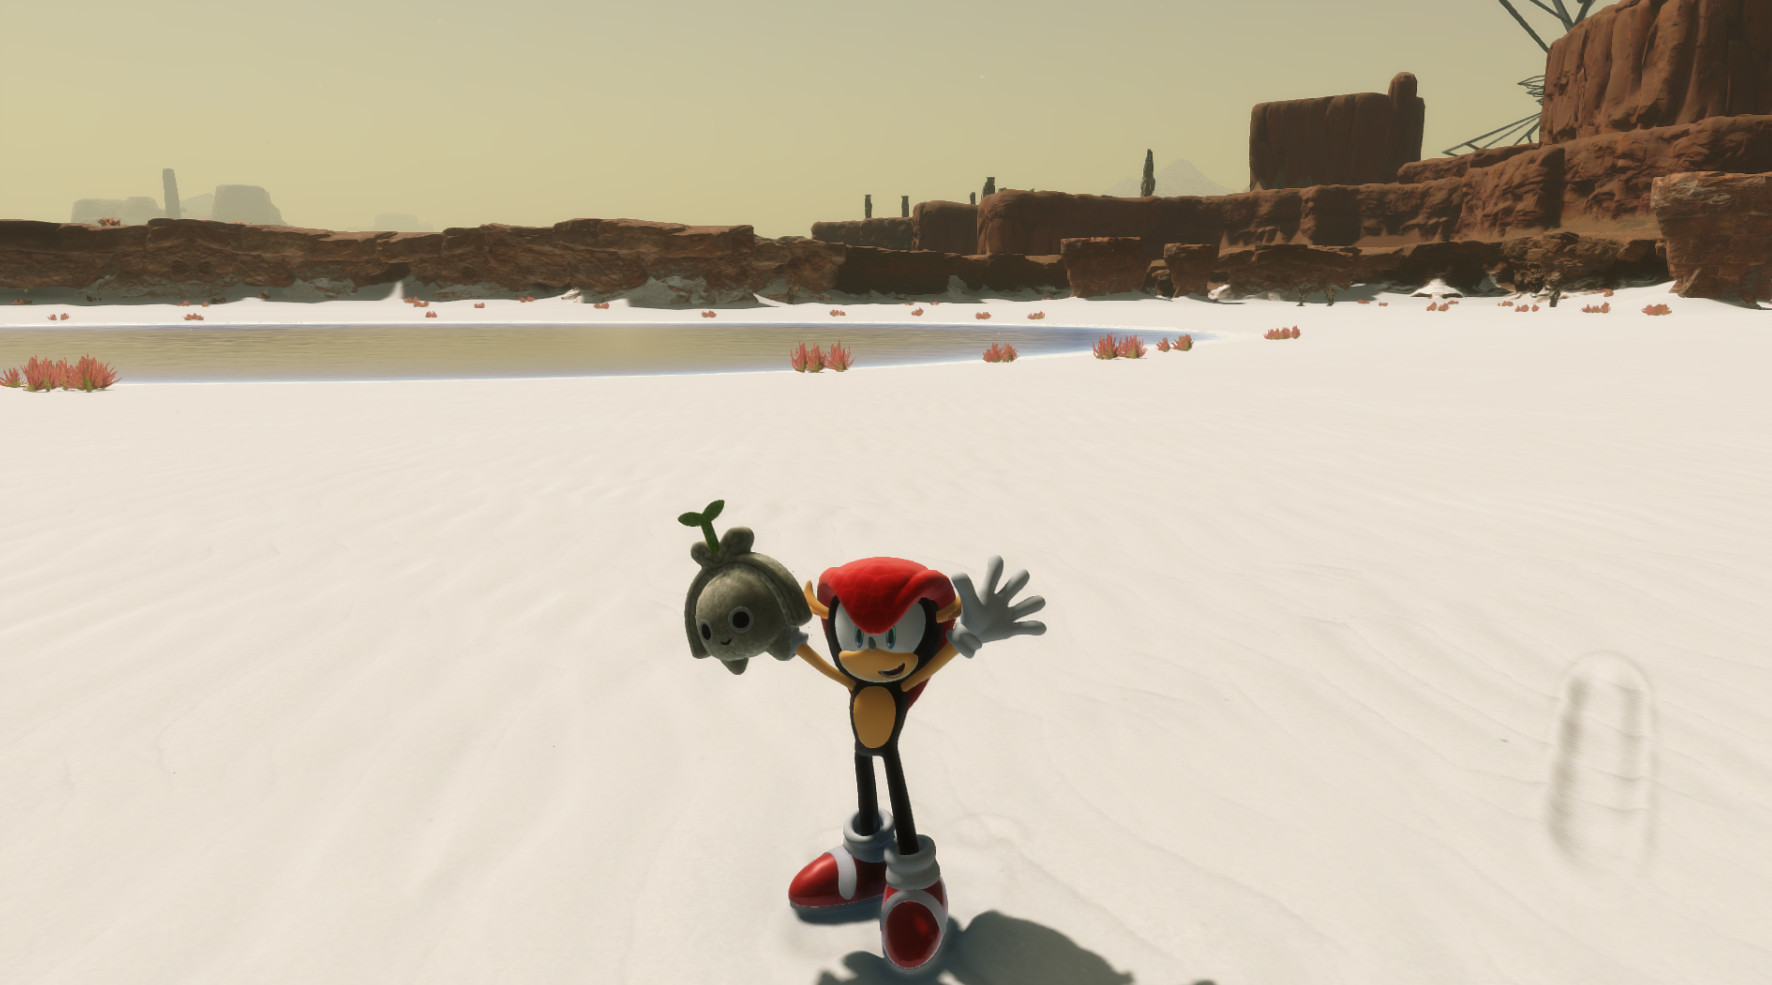 Mighty The Armadillo [Sonic Frontiers] [Mods]